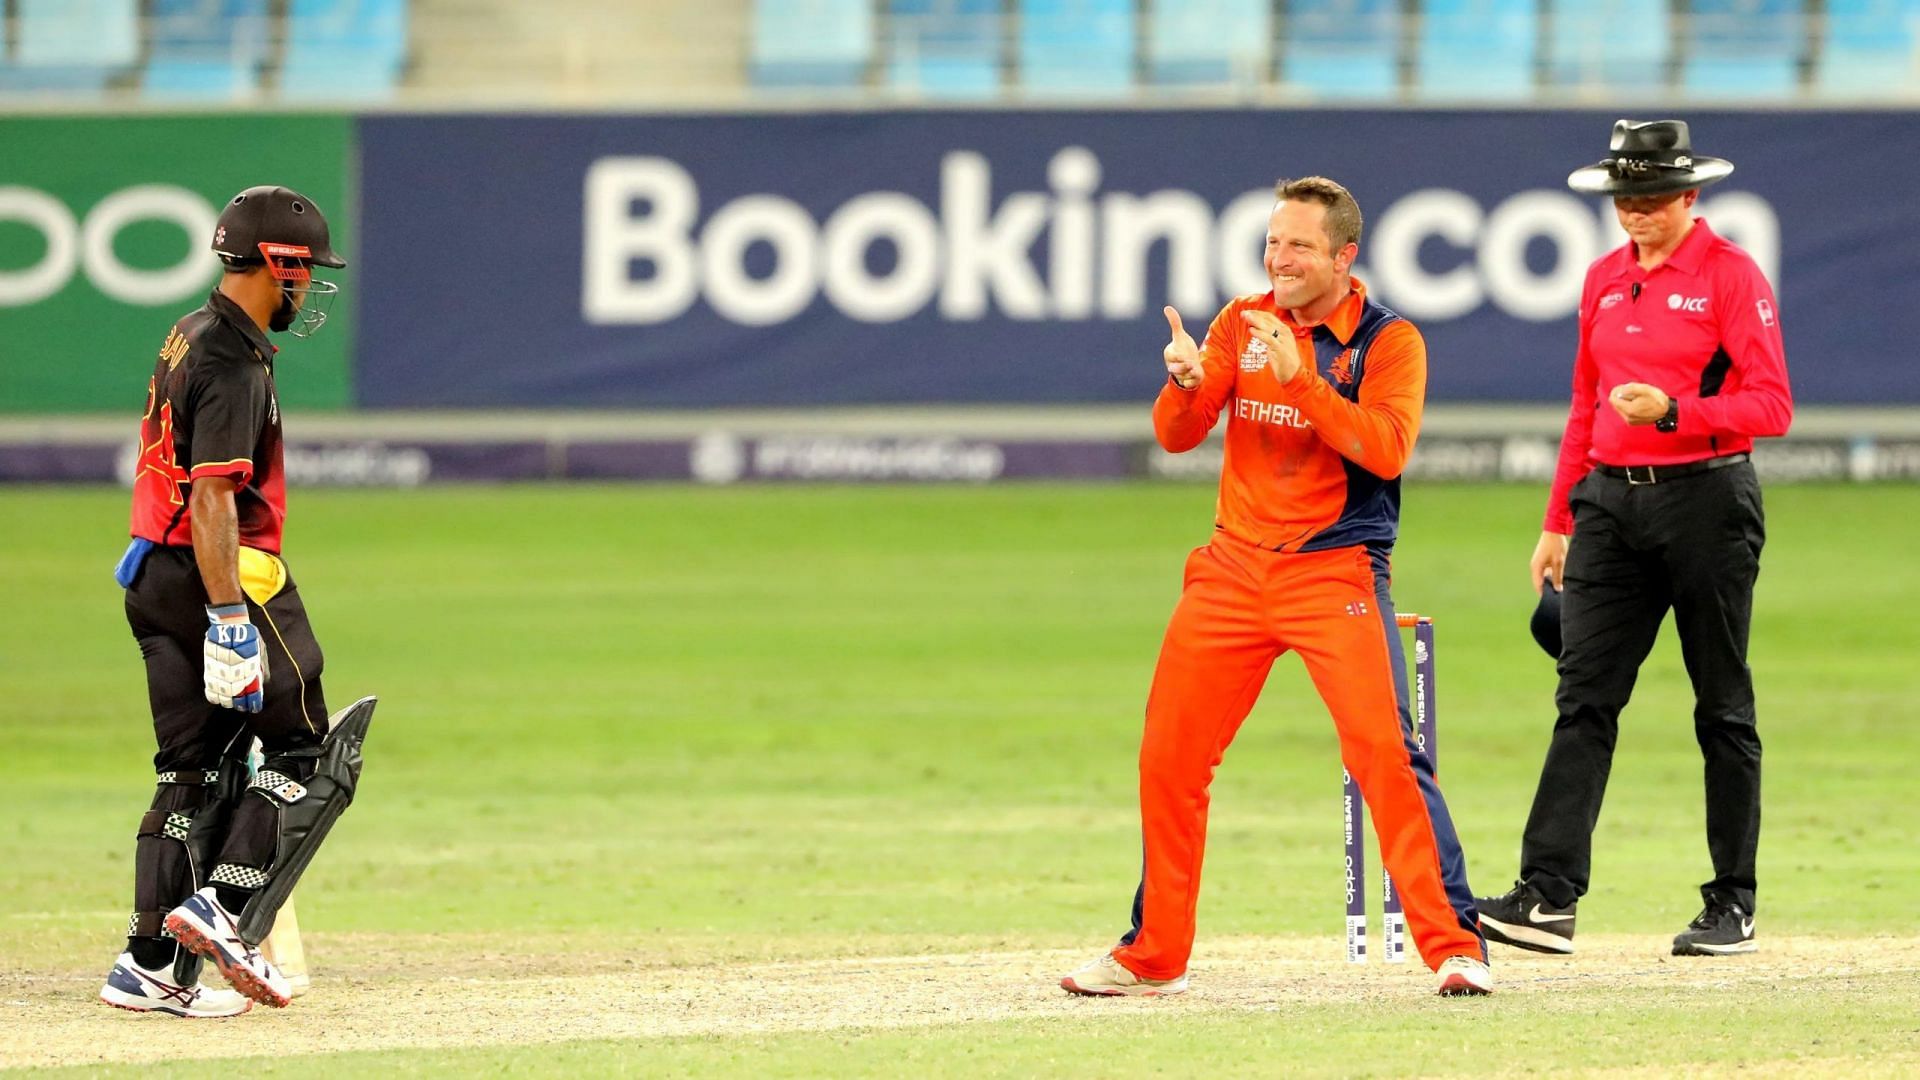 Van der Merwe stands a good chance of ending up Netherlands&#039; highest wicket-taker in the tournament.